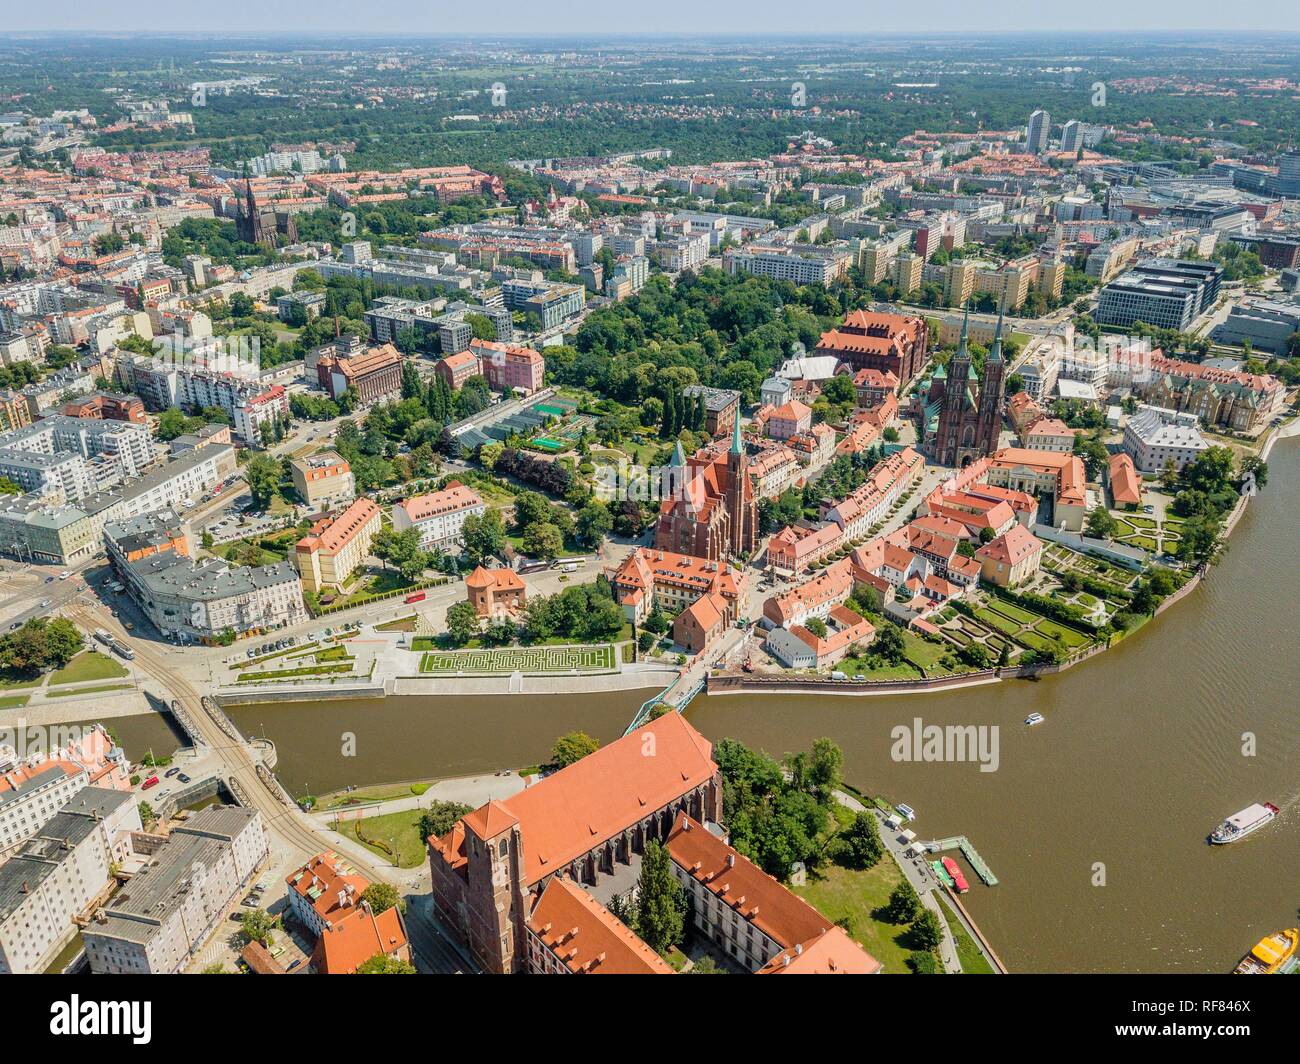 Drone image of the oldest, historic part of Wroclaw, Poland Stock Photo